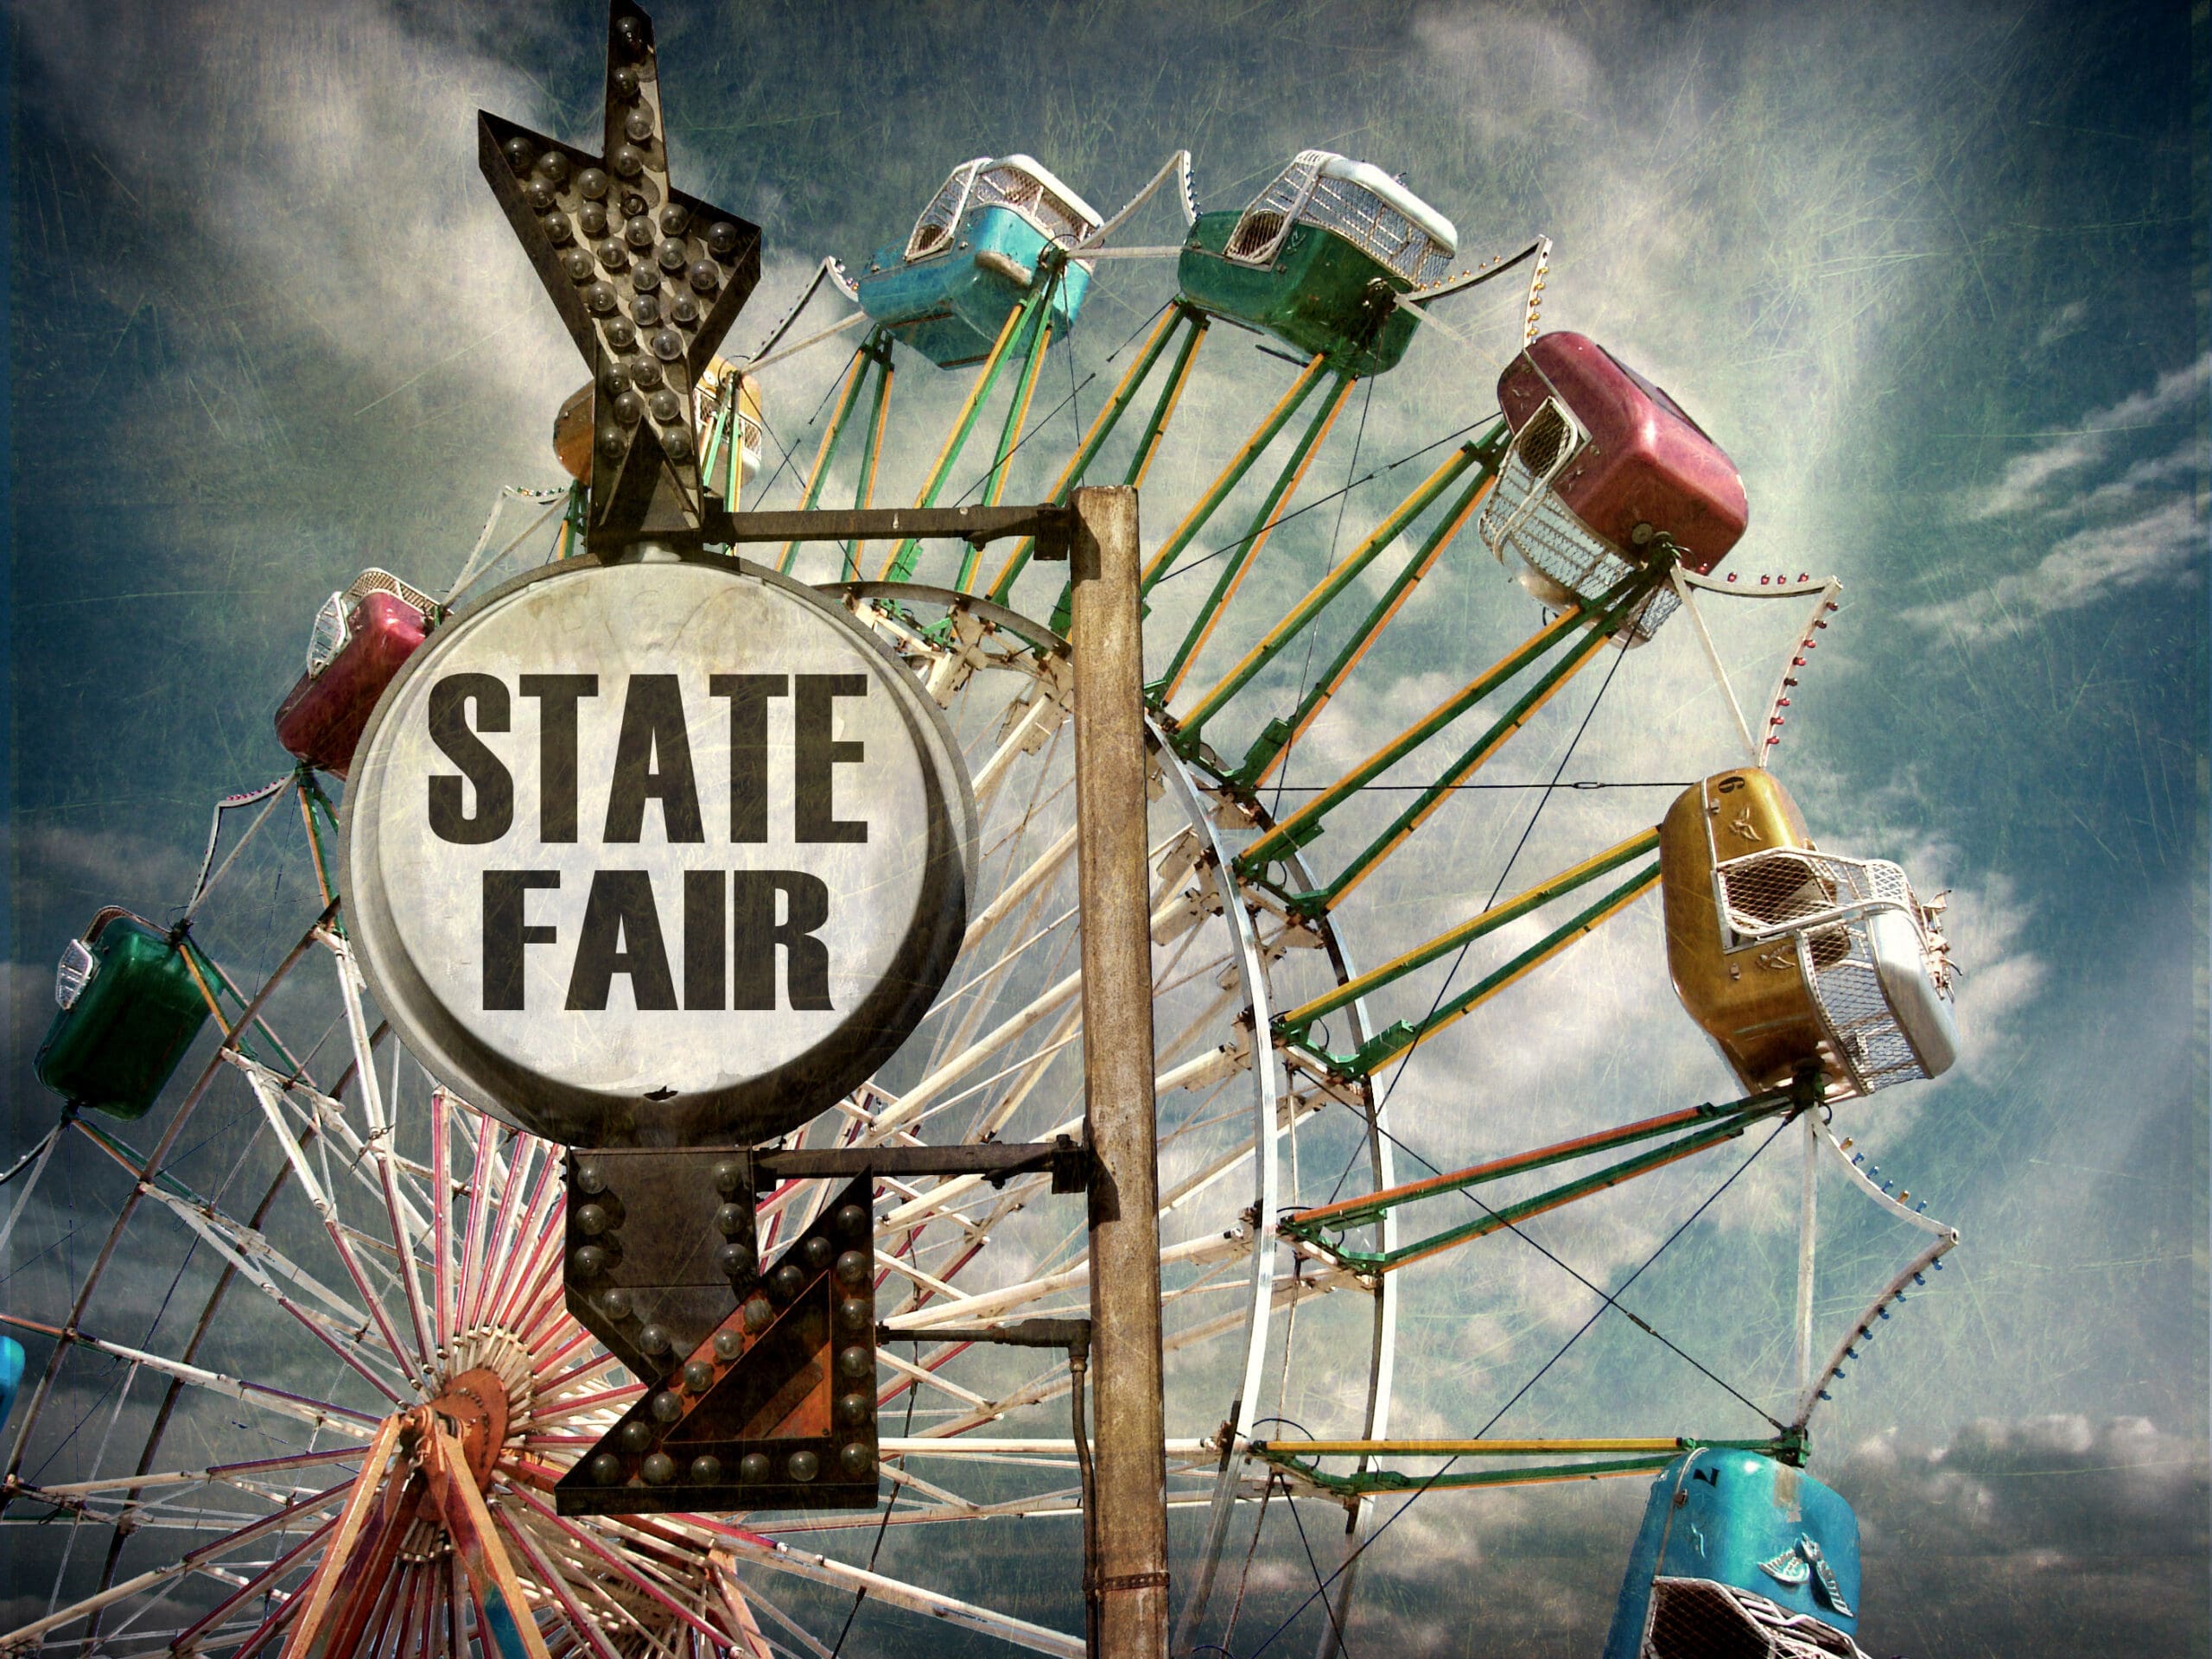 Aged,And,Worn,Vintage,Photo,Of,State,Fair,Sign,With